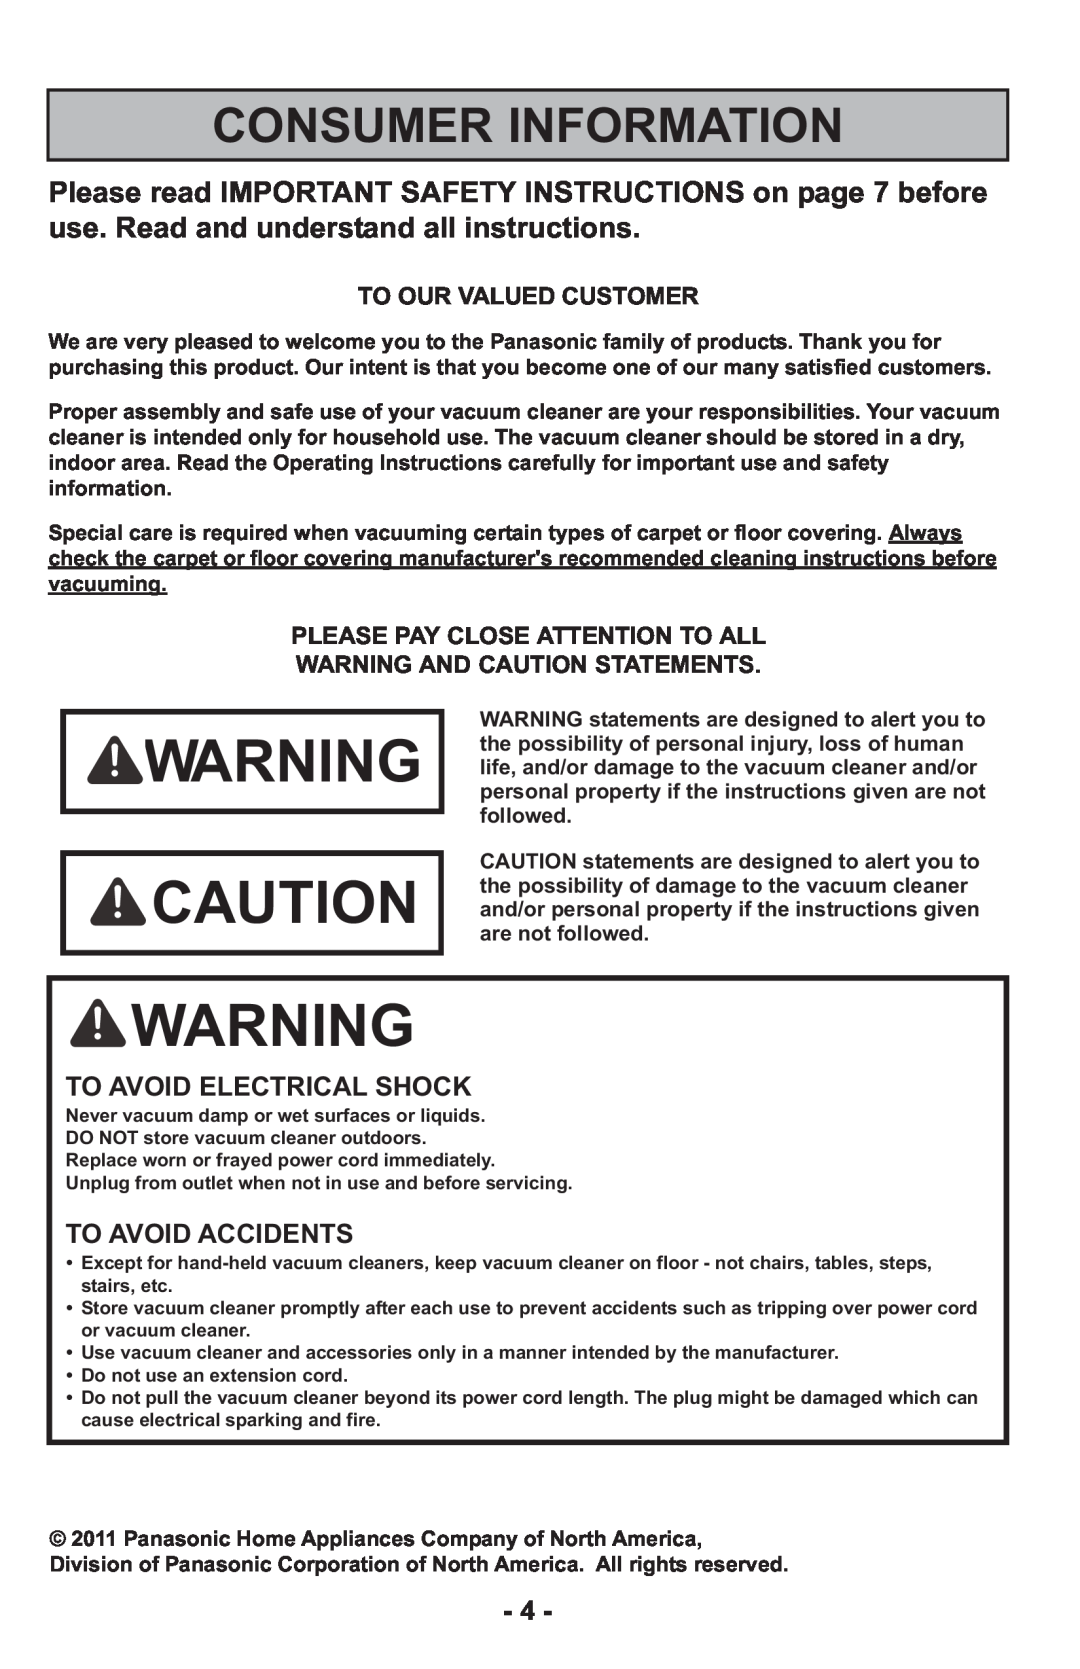 Panasonic MCUL815 operating instructions Consumer Information, To Avoid Electrical Shock, To Avoid Accidents 